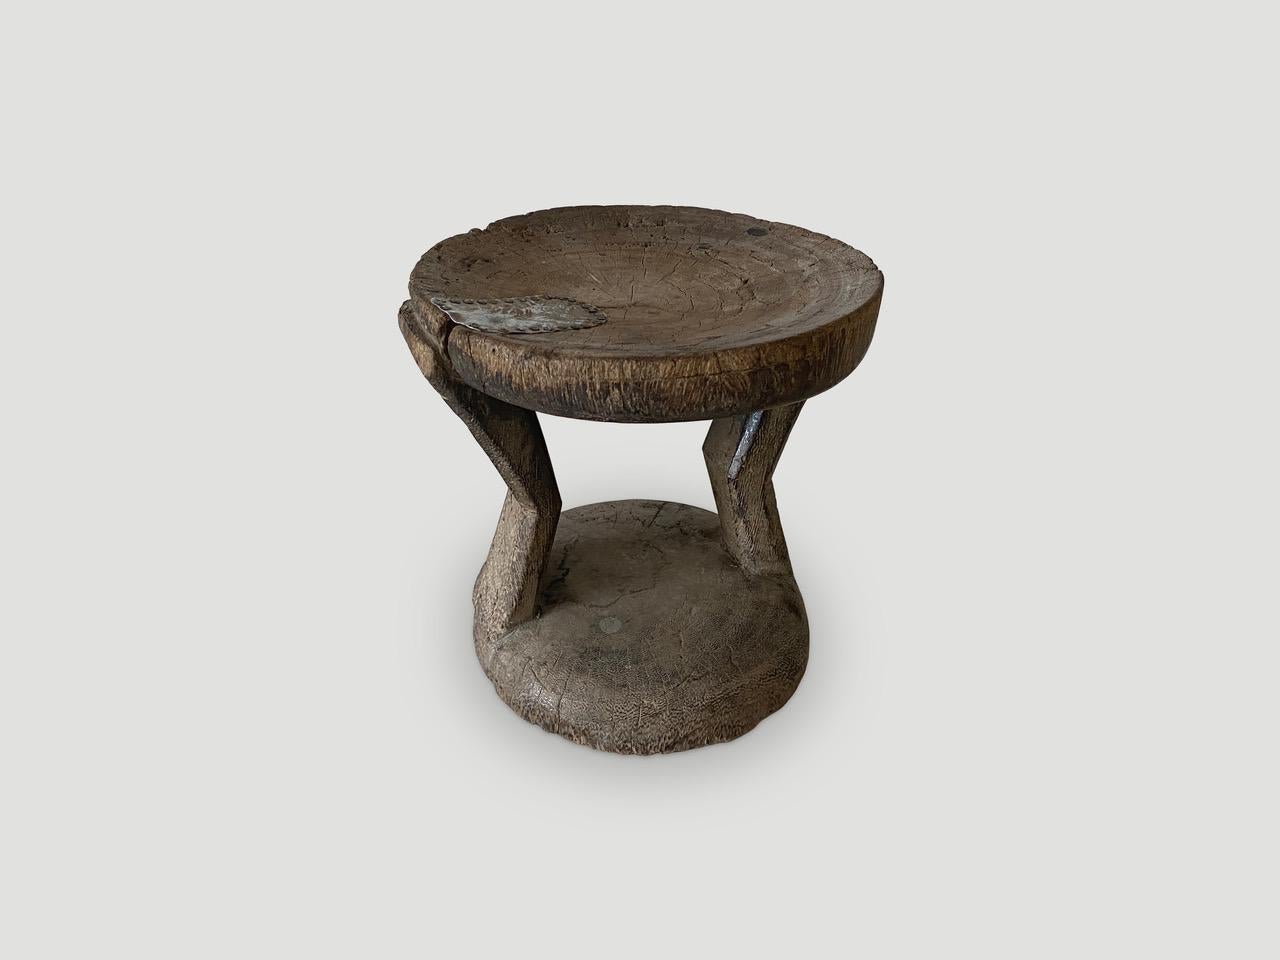 Ivorian Andrianna Shamaris Antique African Side Table or Stool